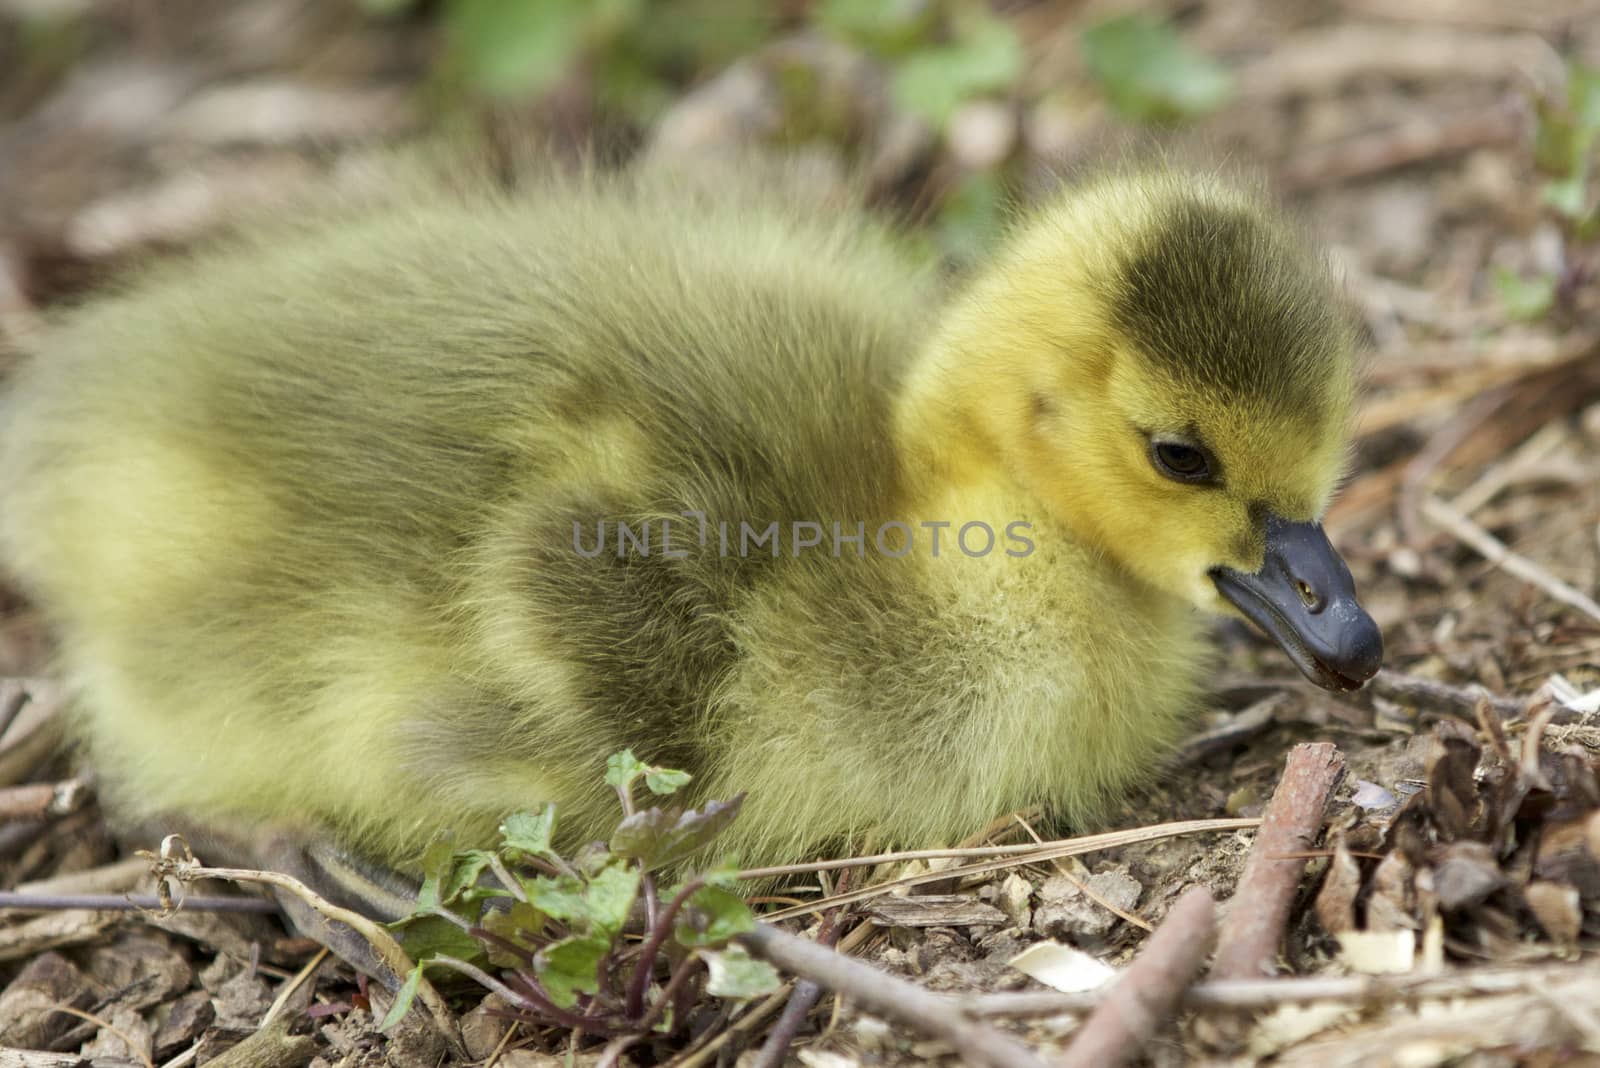 Beautiful isolated image with a cute chick of Canada geese